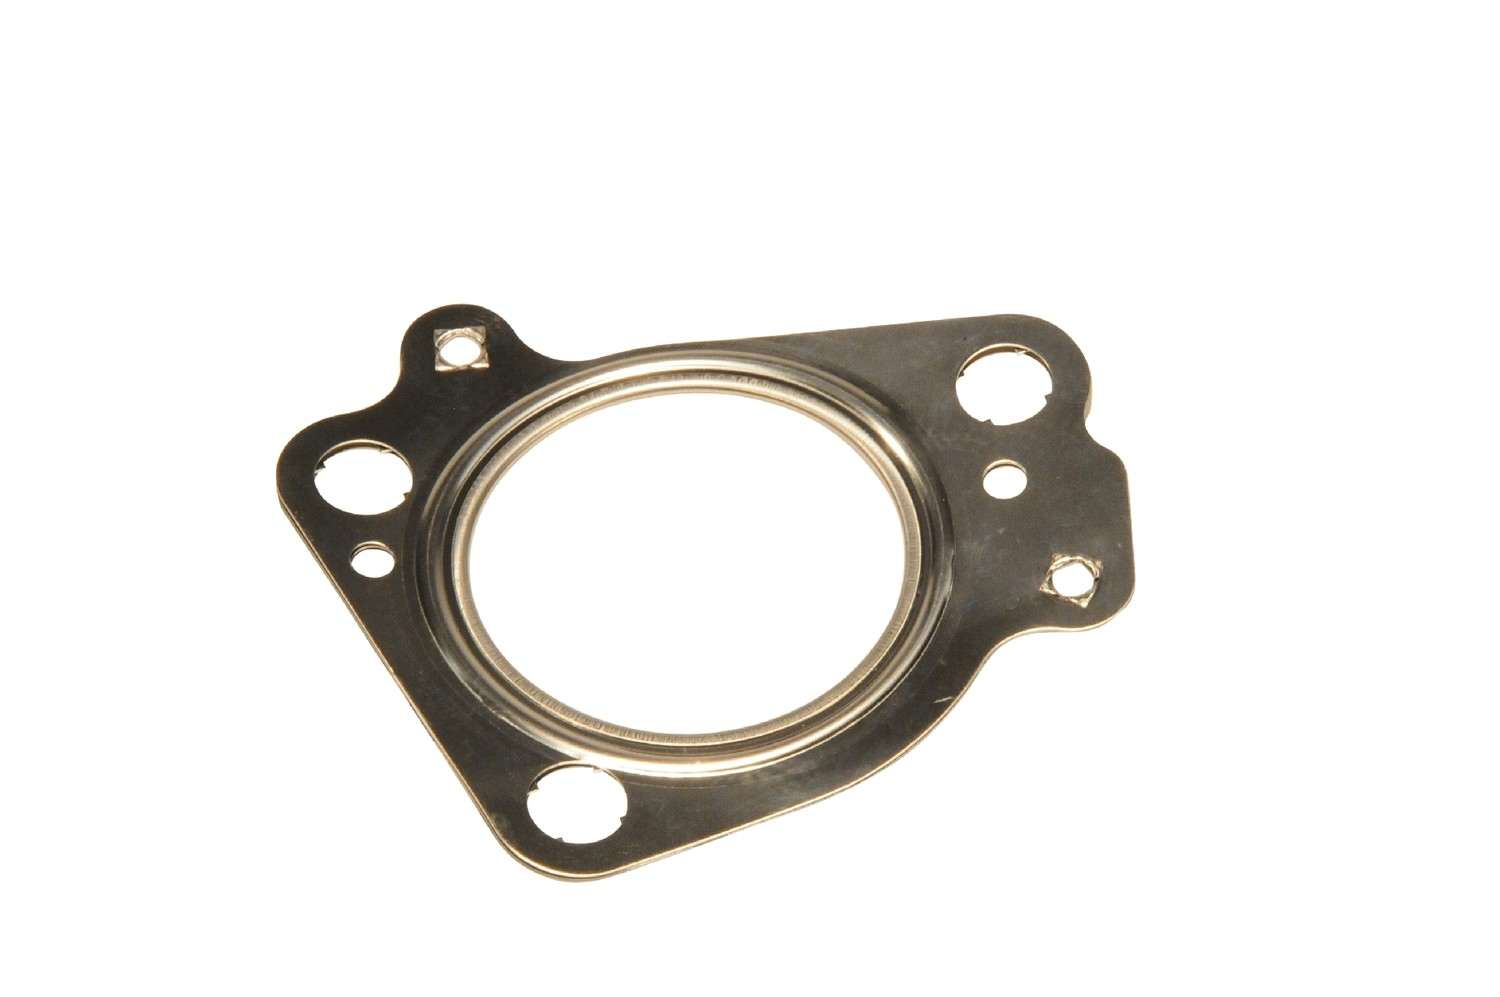 GM GENUINE PARTS - Turbocharger Inlet Gasket - GMP 97192618